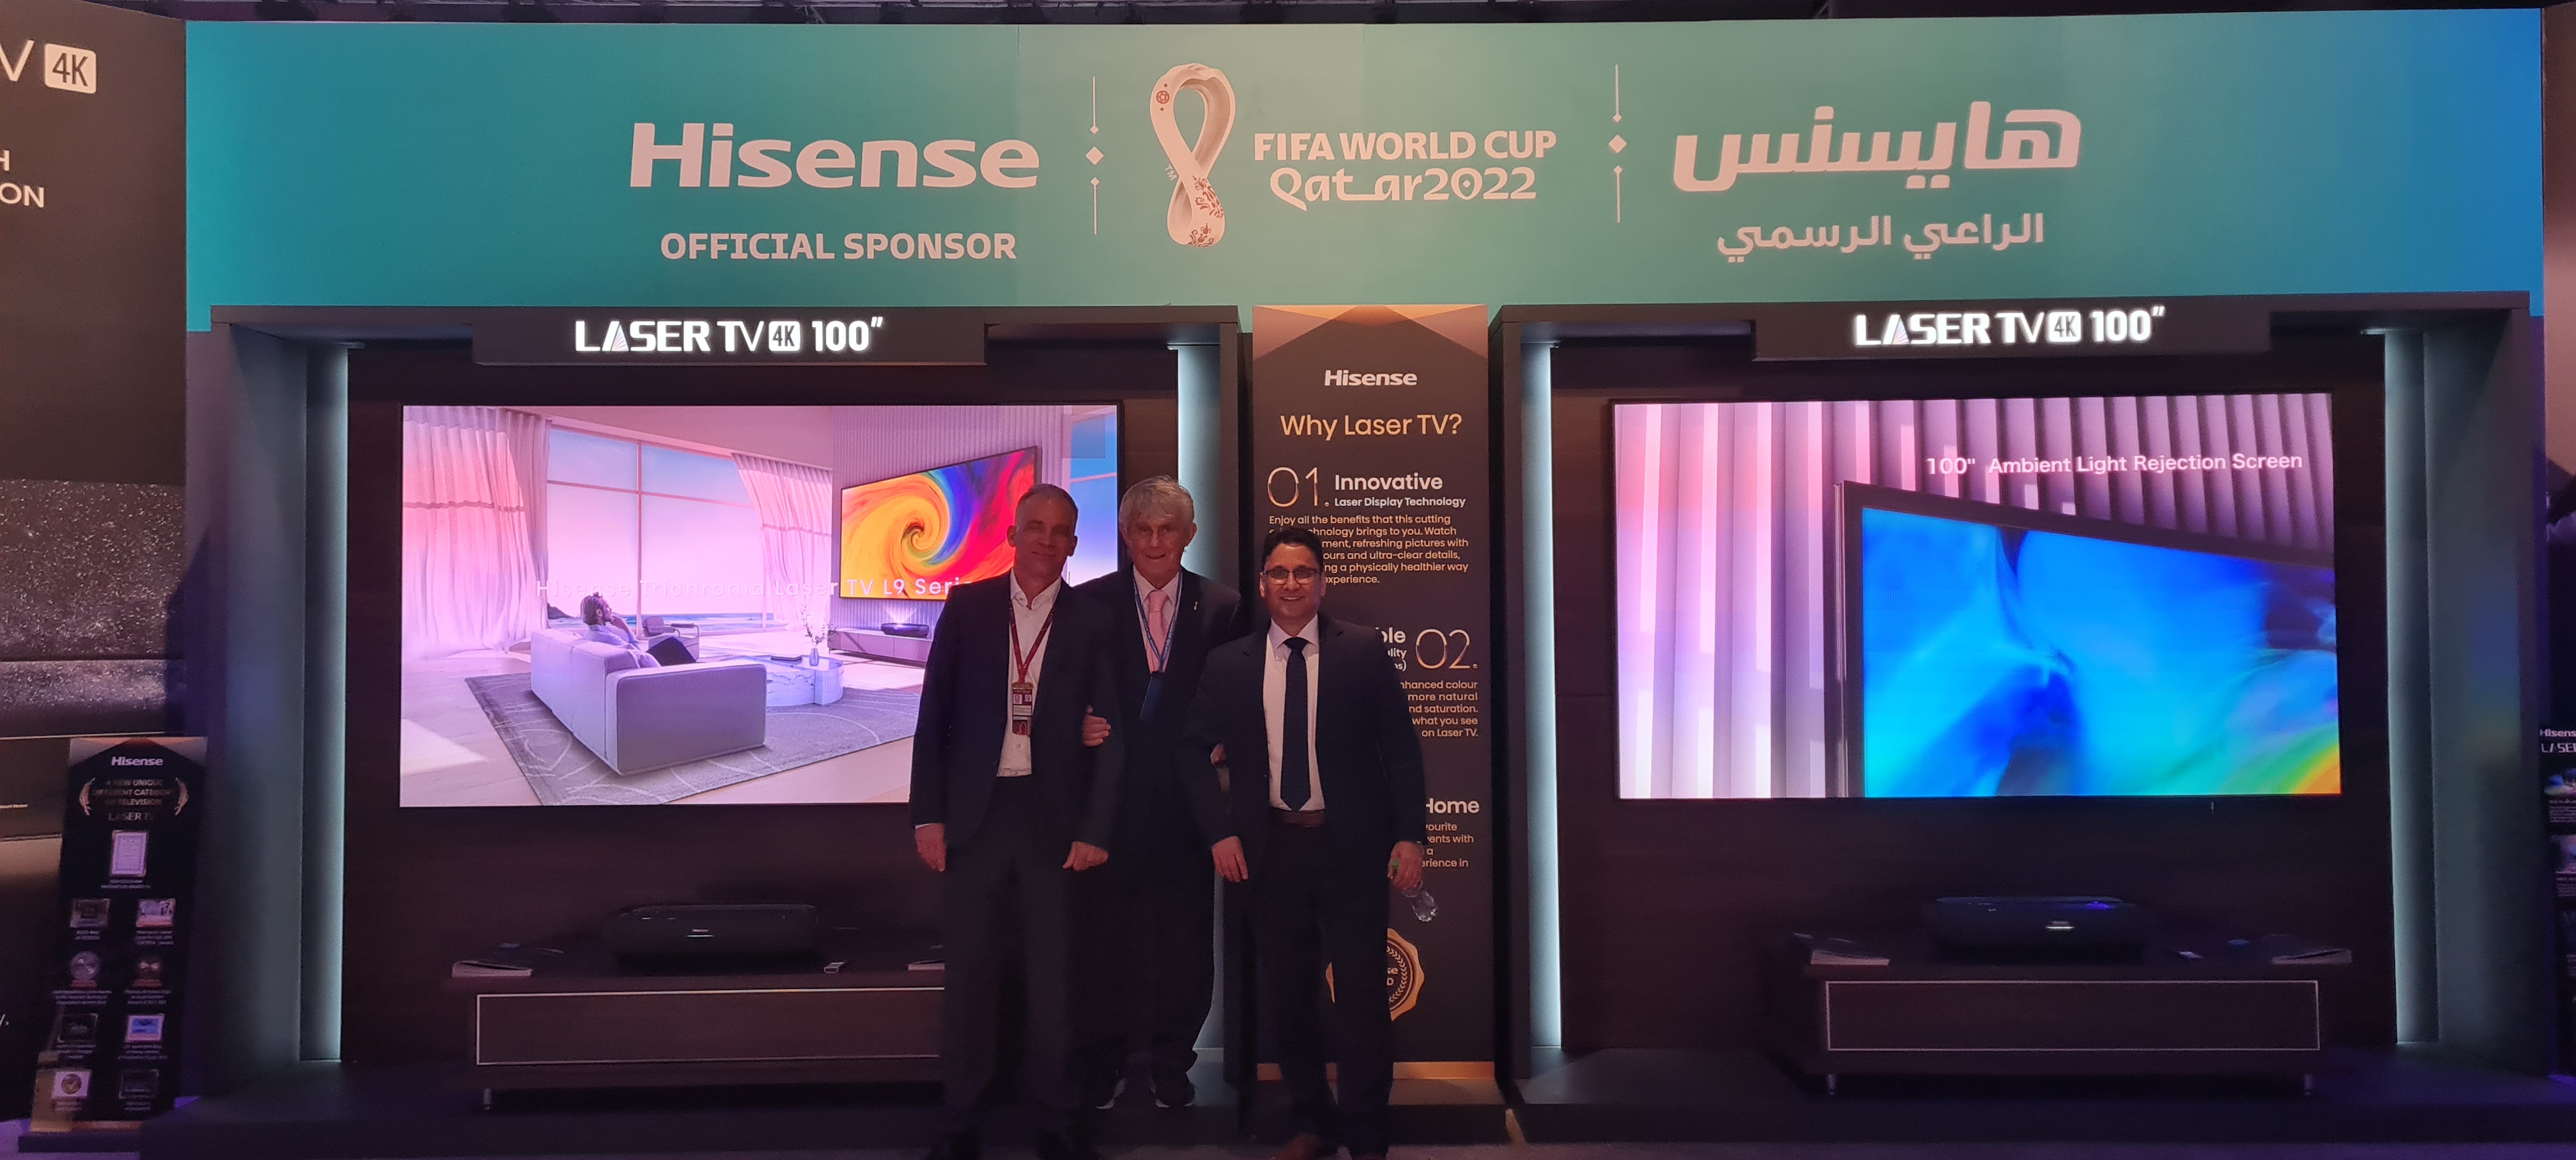 Hisense debuts Laser TV L9G at the FIFA World Cup Qatar 2022 TM Final Match Draw; offering a  glimpse of the football home experience